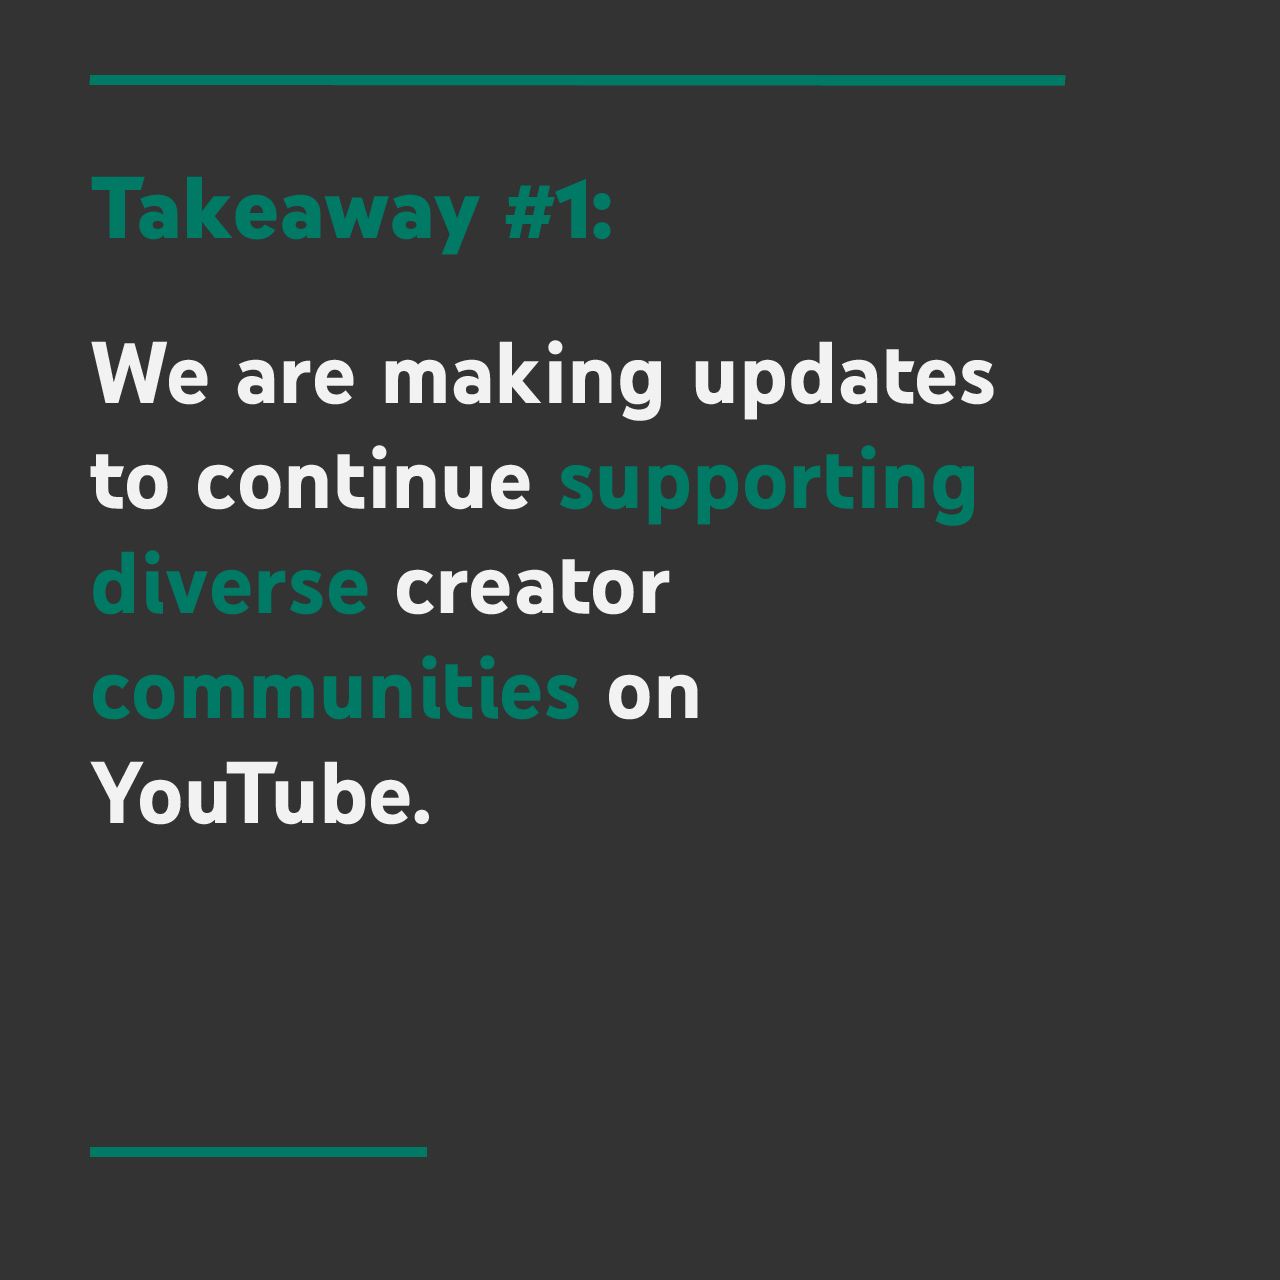 Updates On Our Efforts To Make Youtube A More Inclusive Platform